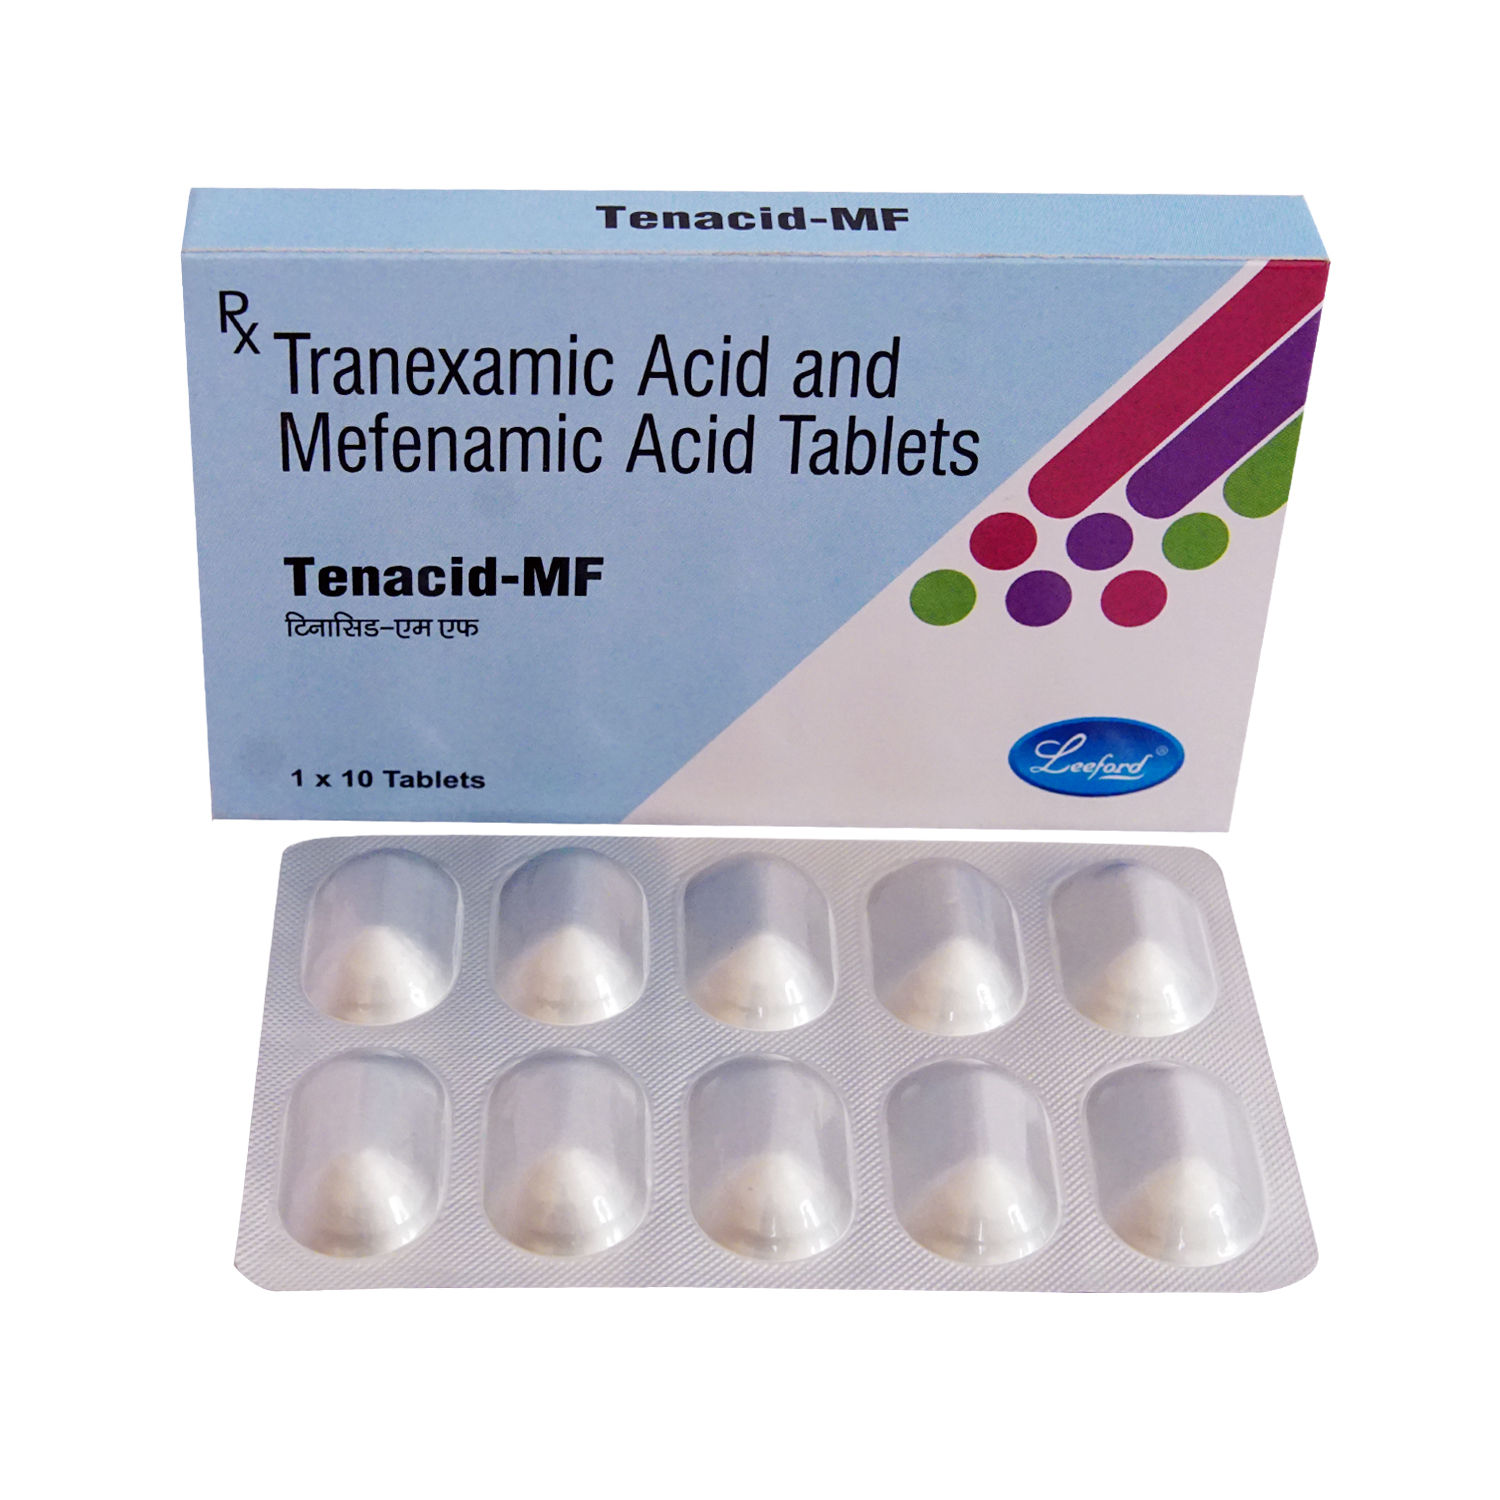 Tenacid Mf Tablet Price Uses Side Effects Composition Apollo 24 7